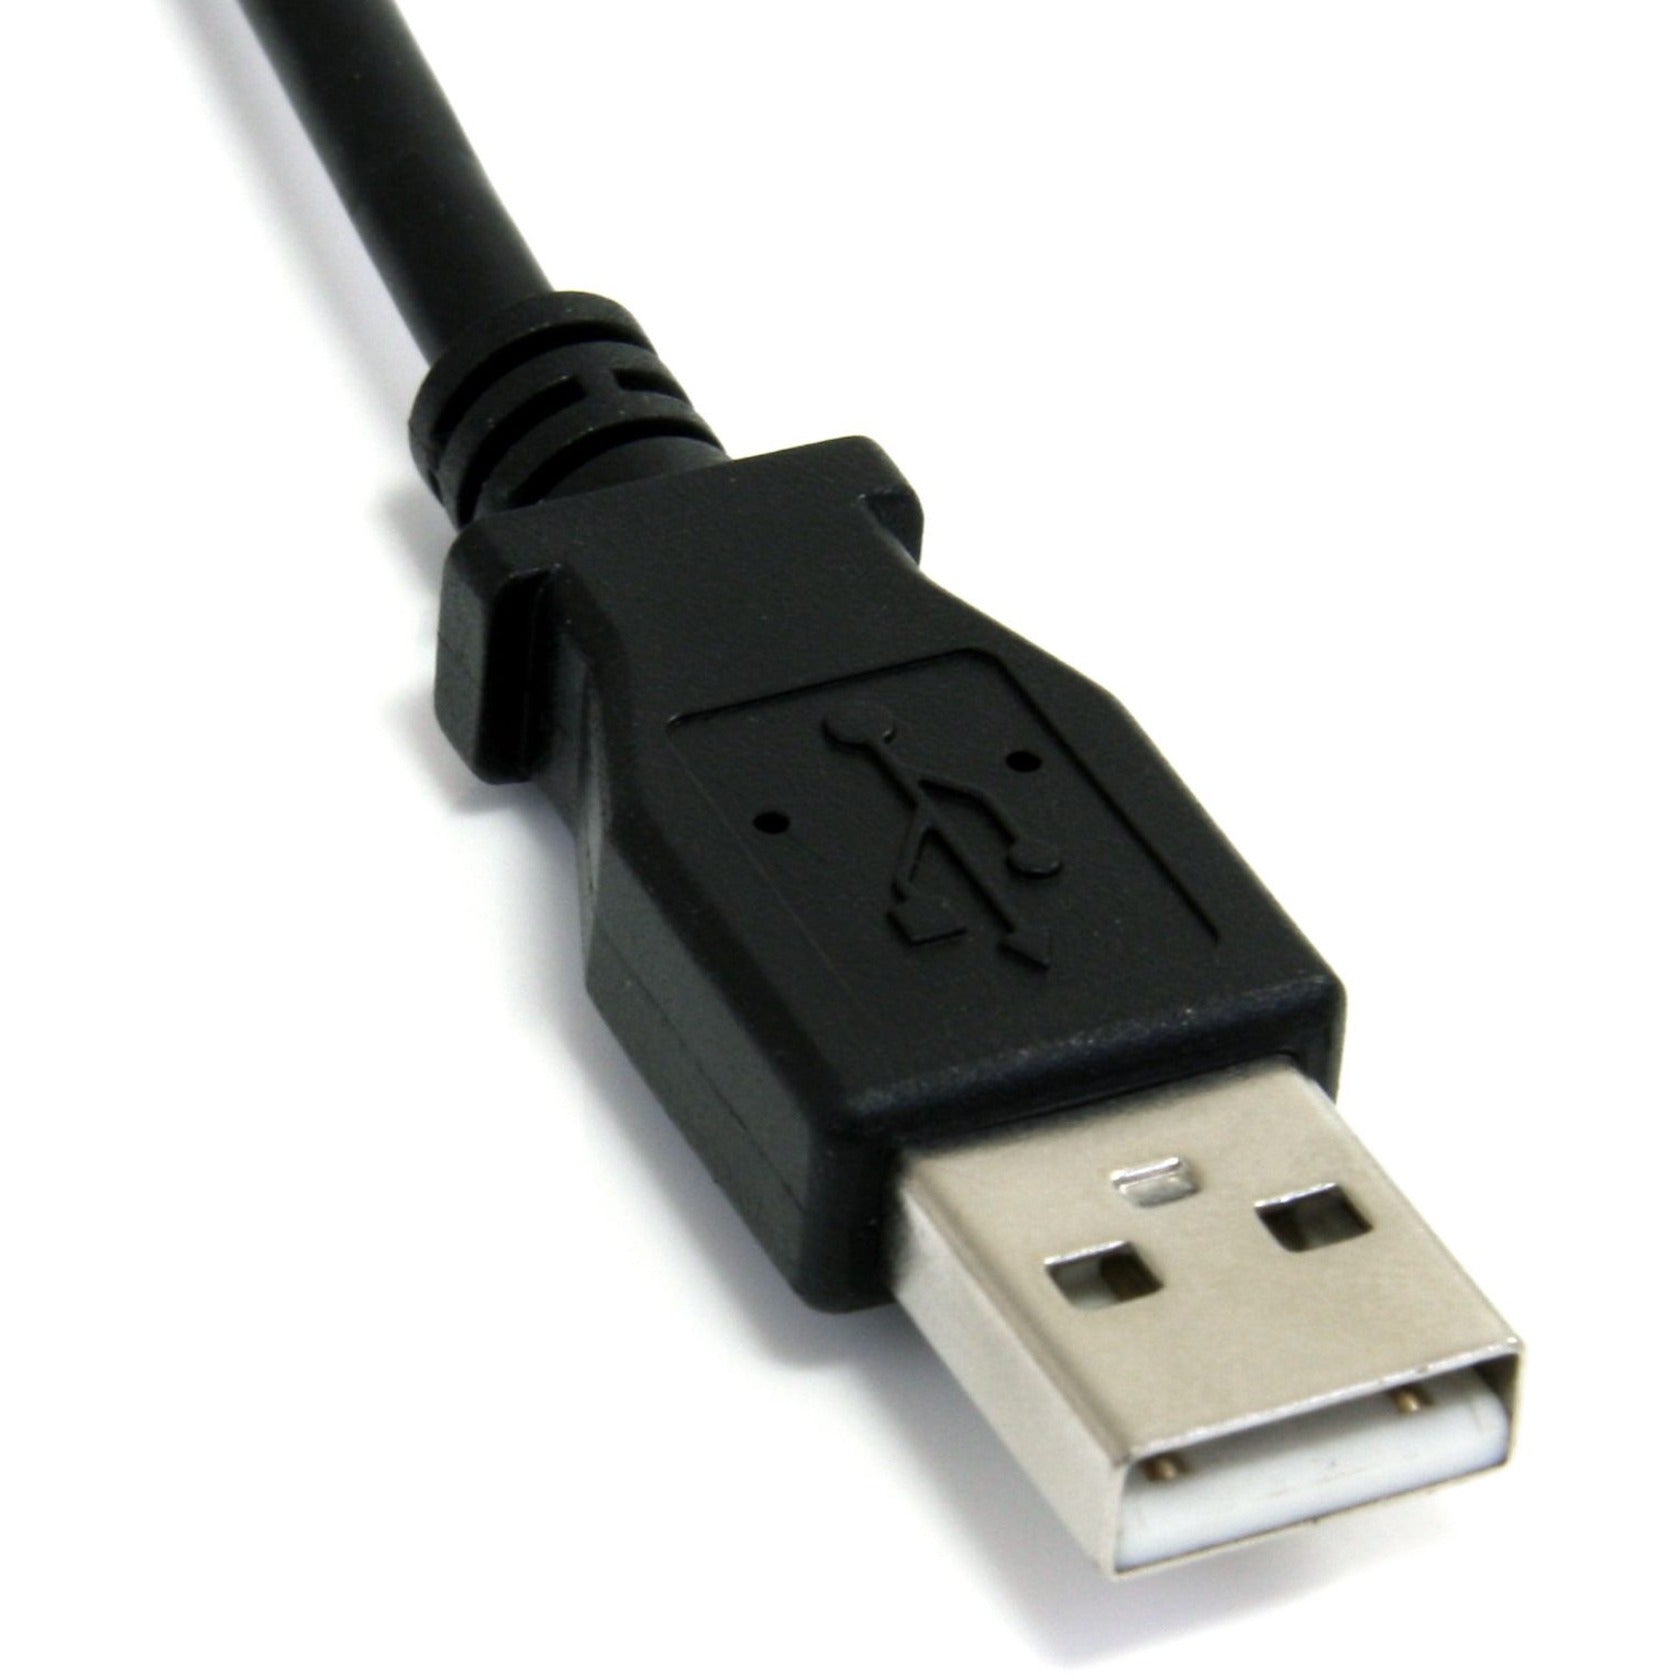 StarTech.com USBUPS06 6 ft Smart UPS Replacement USB Cable, EMI Protection, Copper Conductor, Black